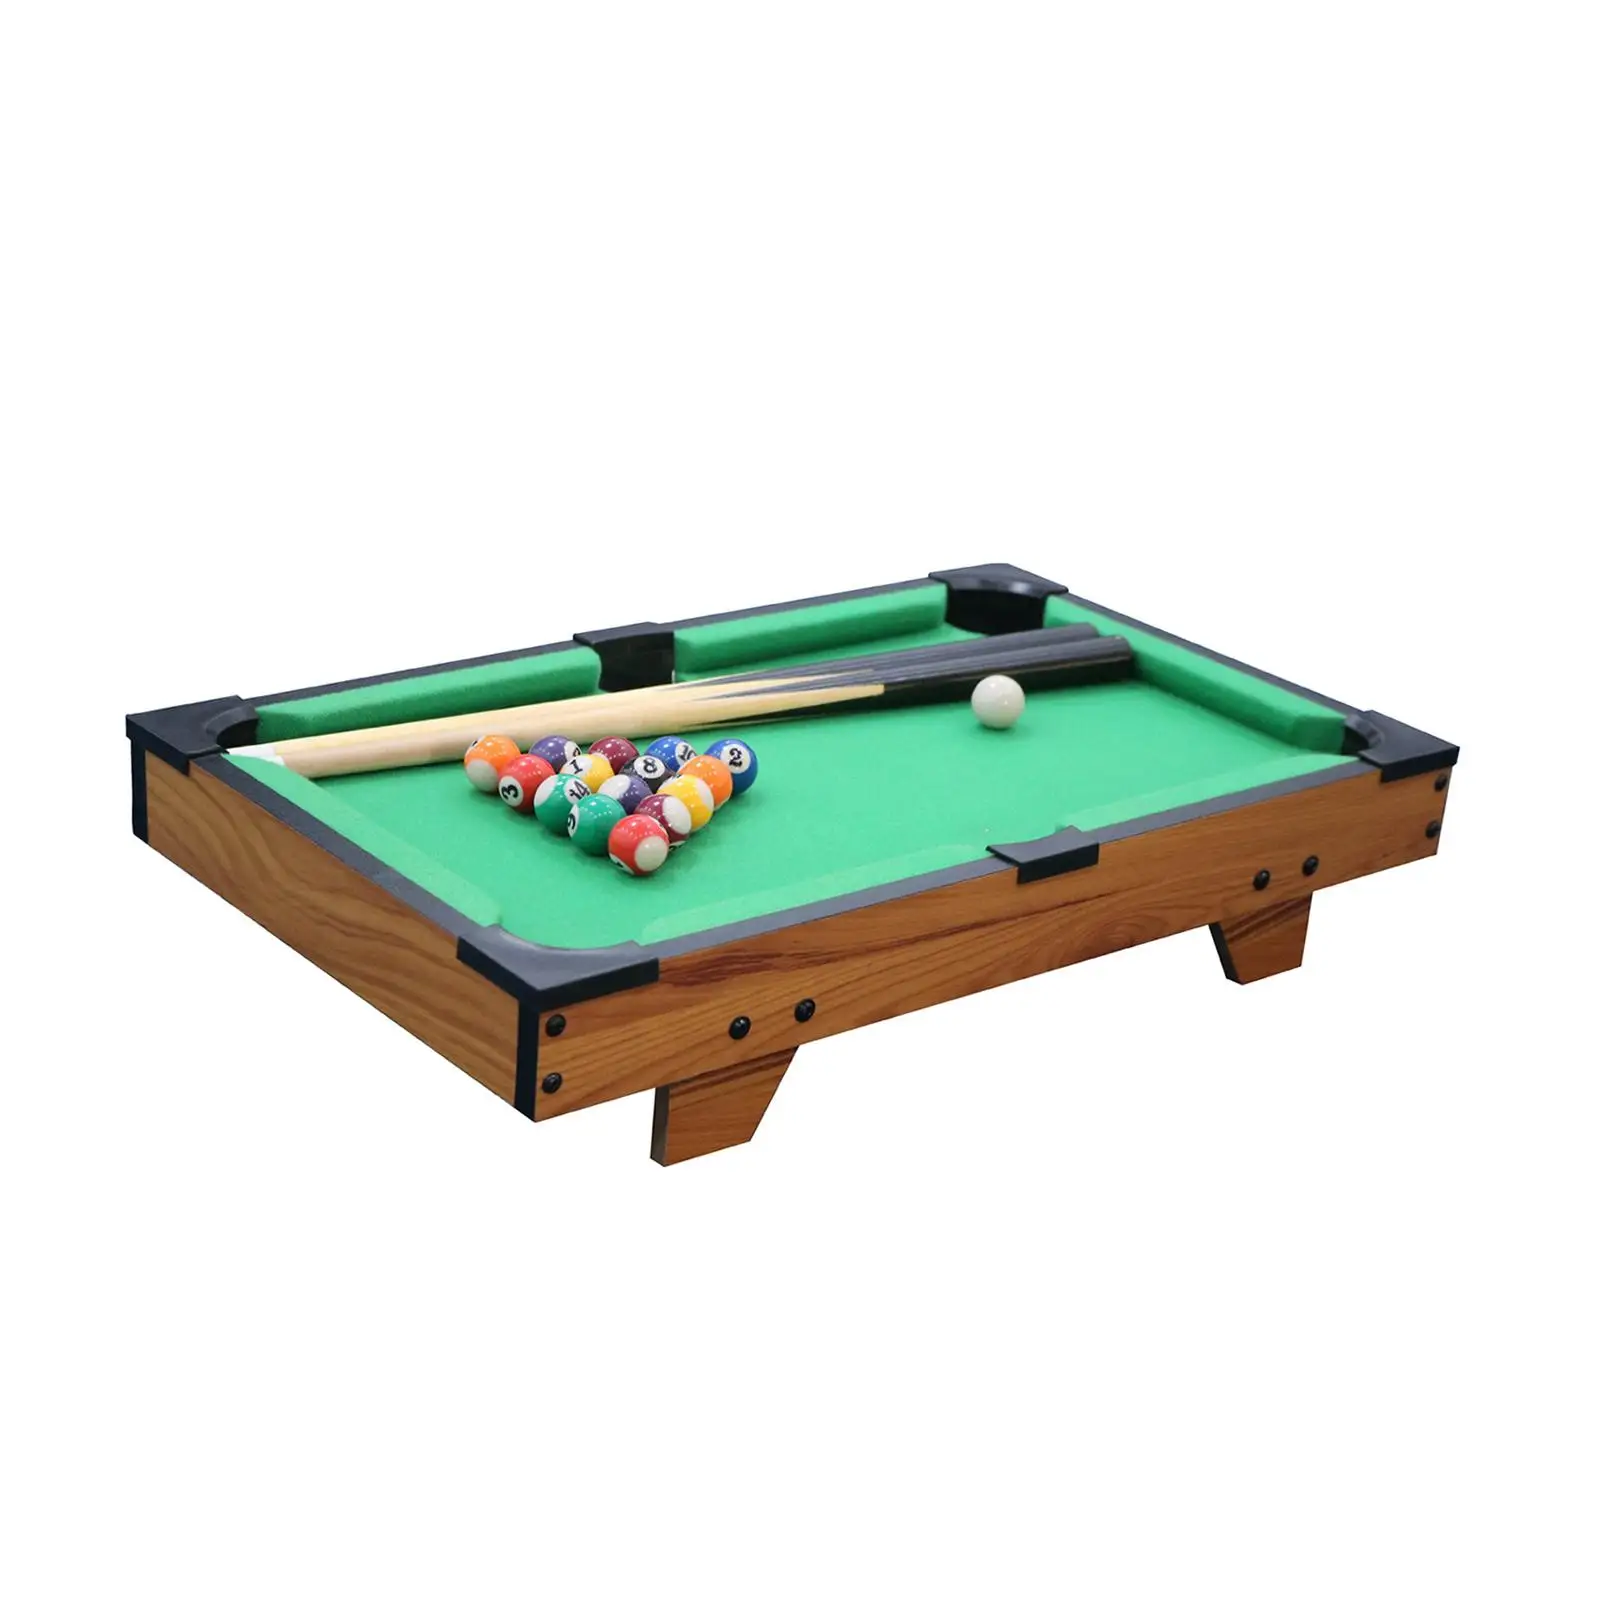 Portable Mini Table pool Game Set Balls Cues Interactive Snooker Billiards Toy for Family Dorm Entertainment Desktop Office